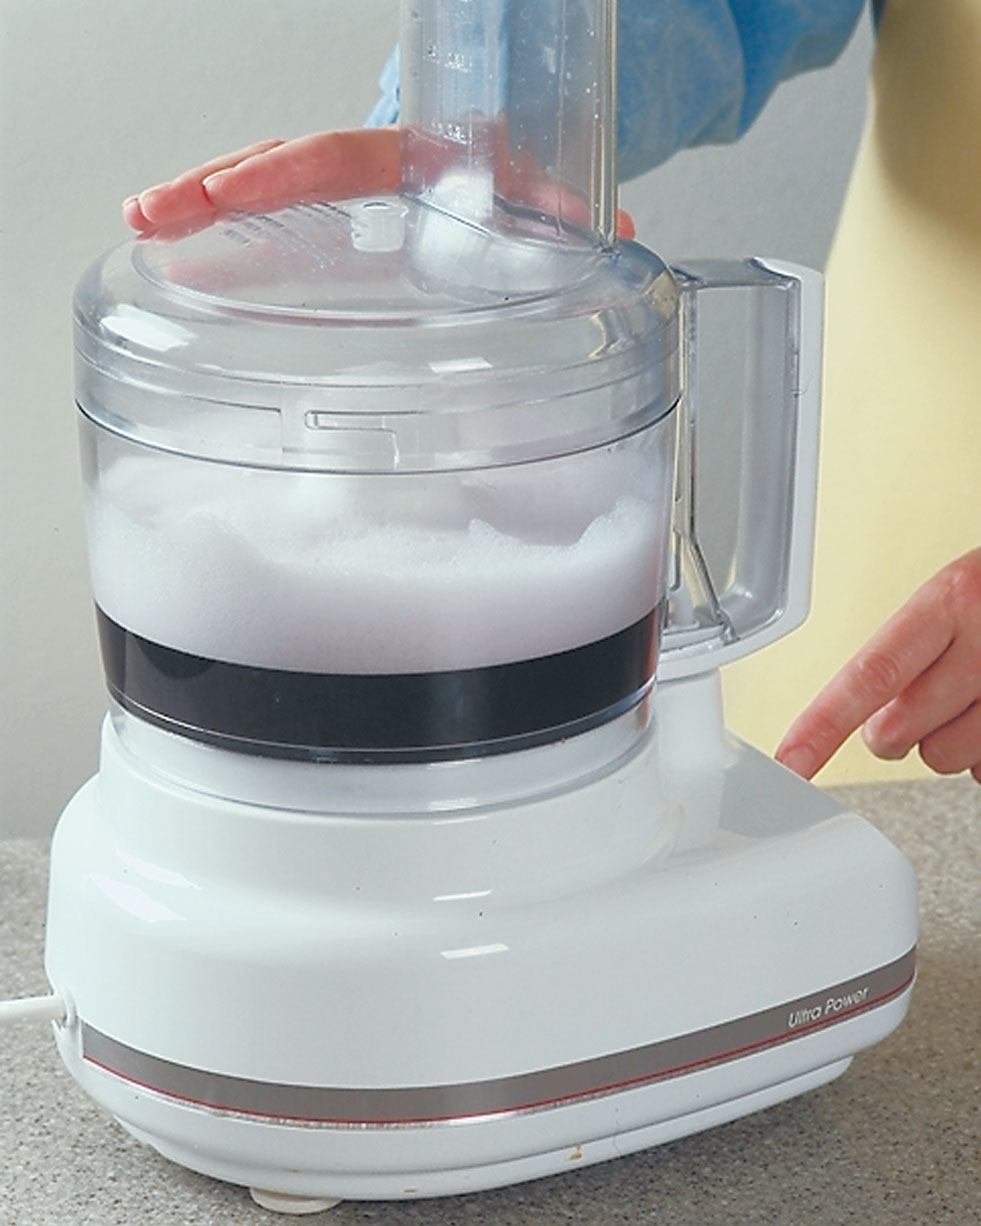 How to Clean a Food Processor